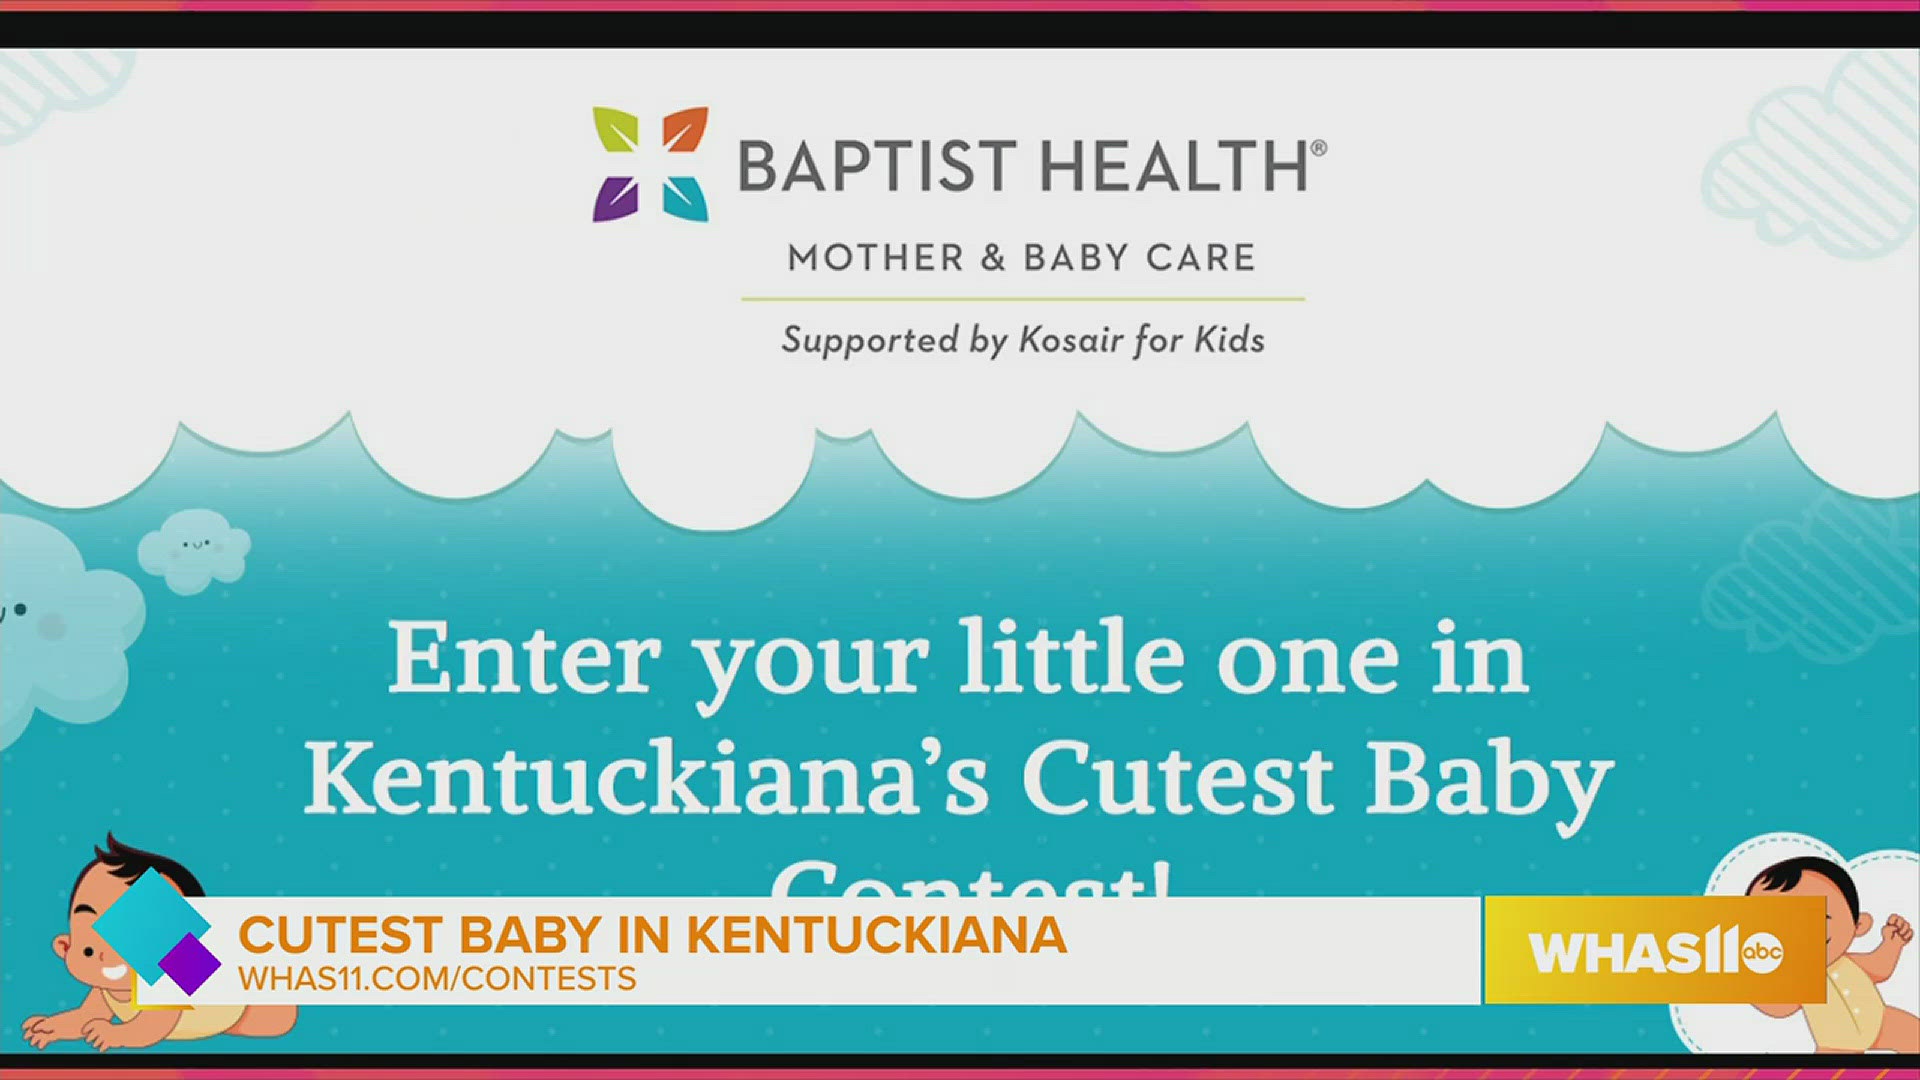 You can win a gift basket and a $100 Mamili gift card by entering the Cutest Baby in Kentuckiana contest by June 17th. Submit your baby's photo at whas11.com/contest